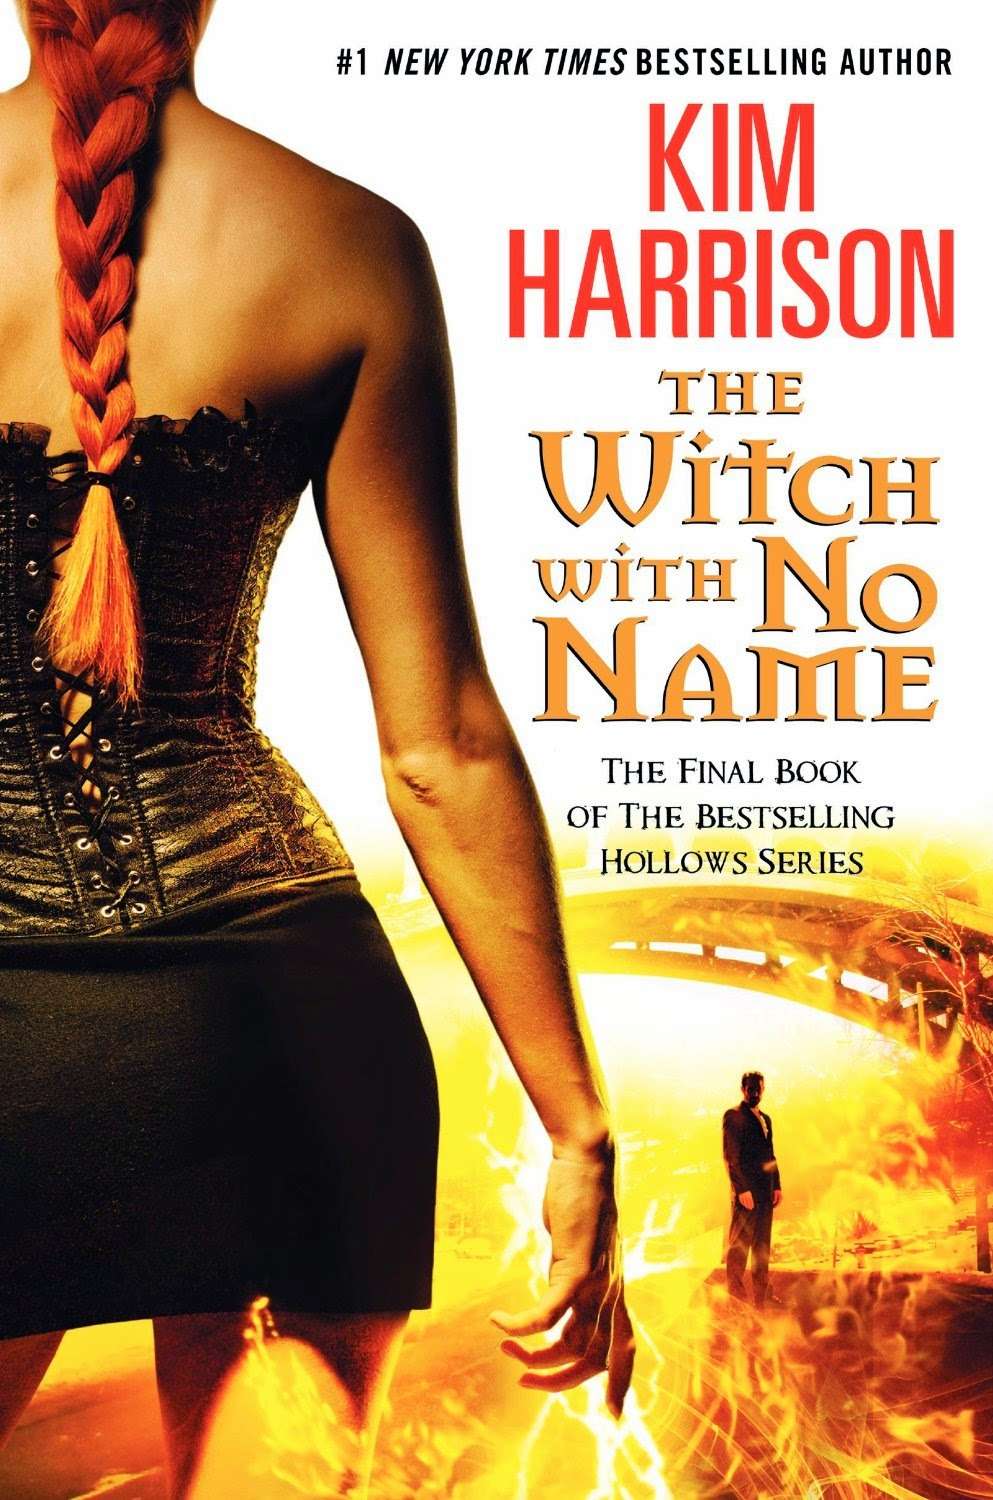 The Witch with No Name (Kim Harrison)